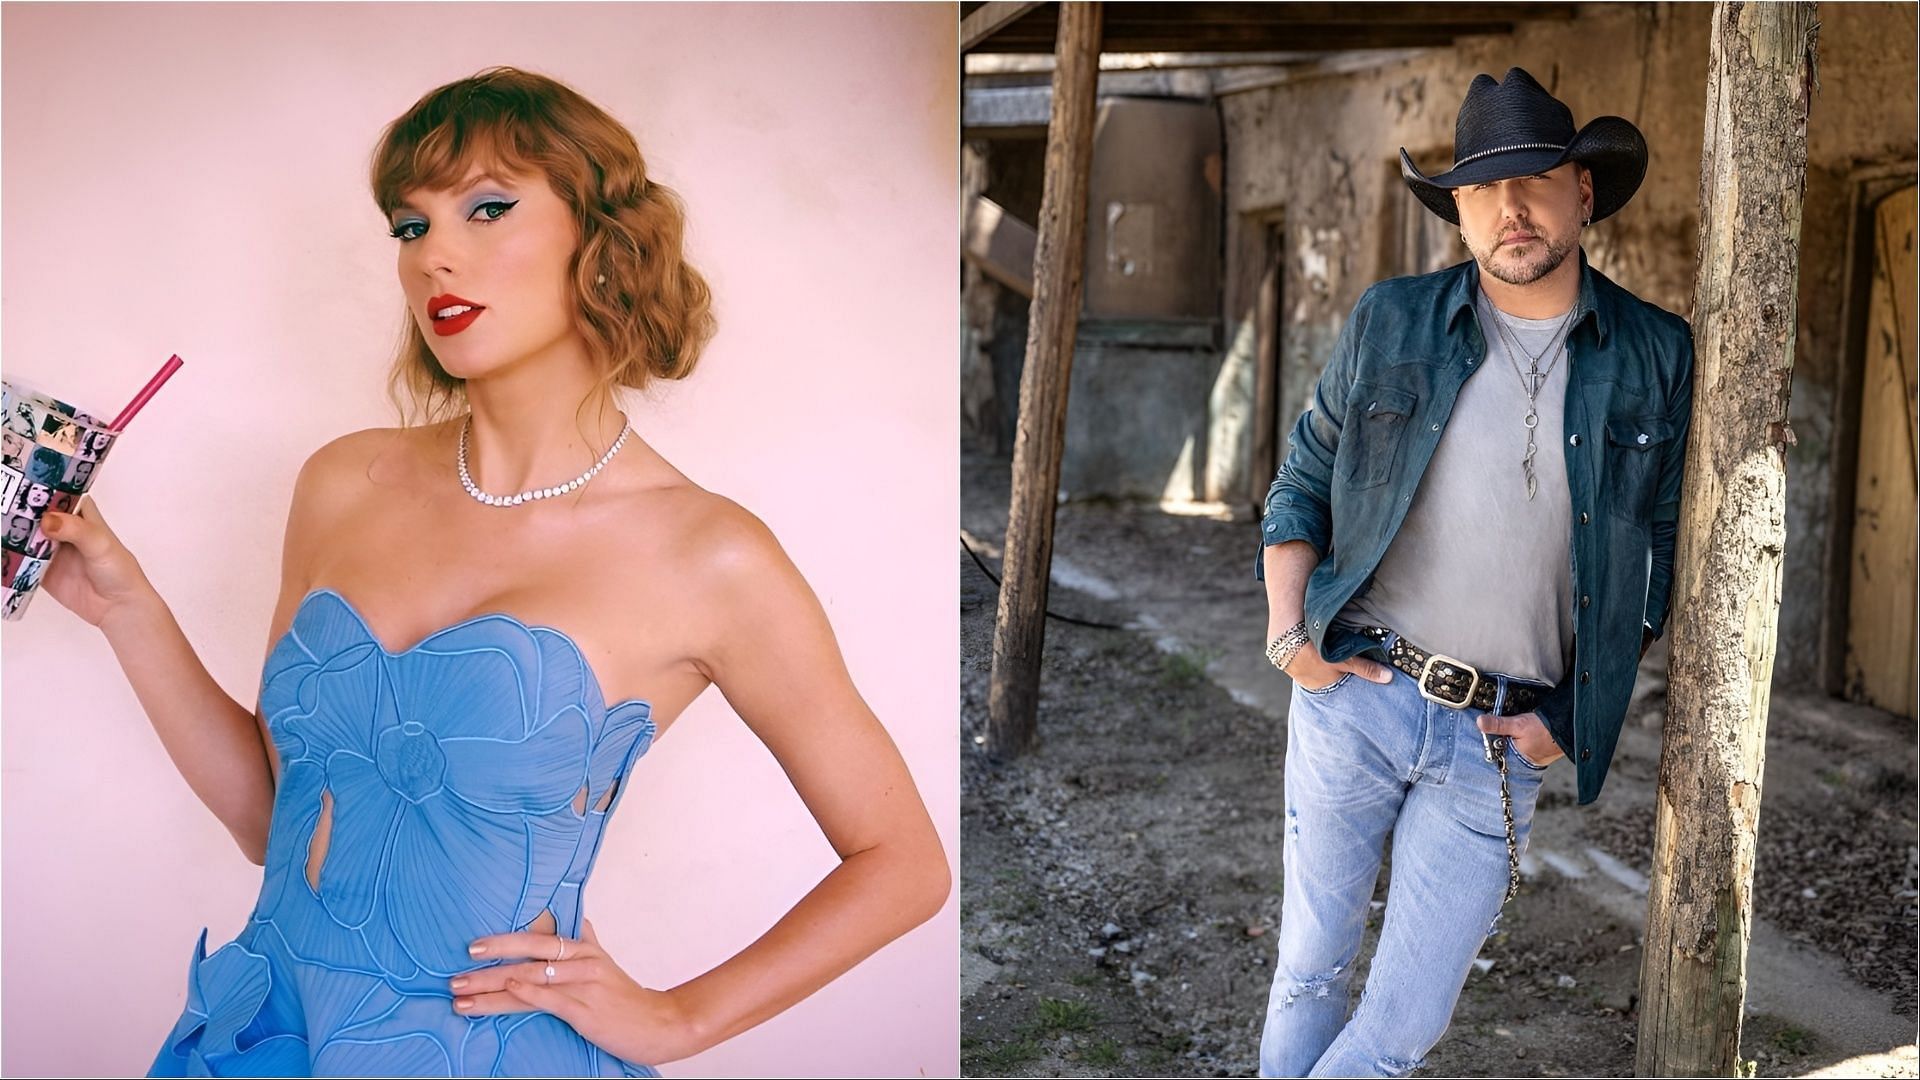 The report of Jason Aldean rejecting a collaboration with Taylor Swift was revealed to be a satire (Images via Instagram/taylorswift and jasonaldean)